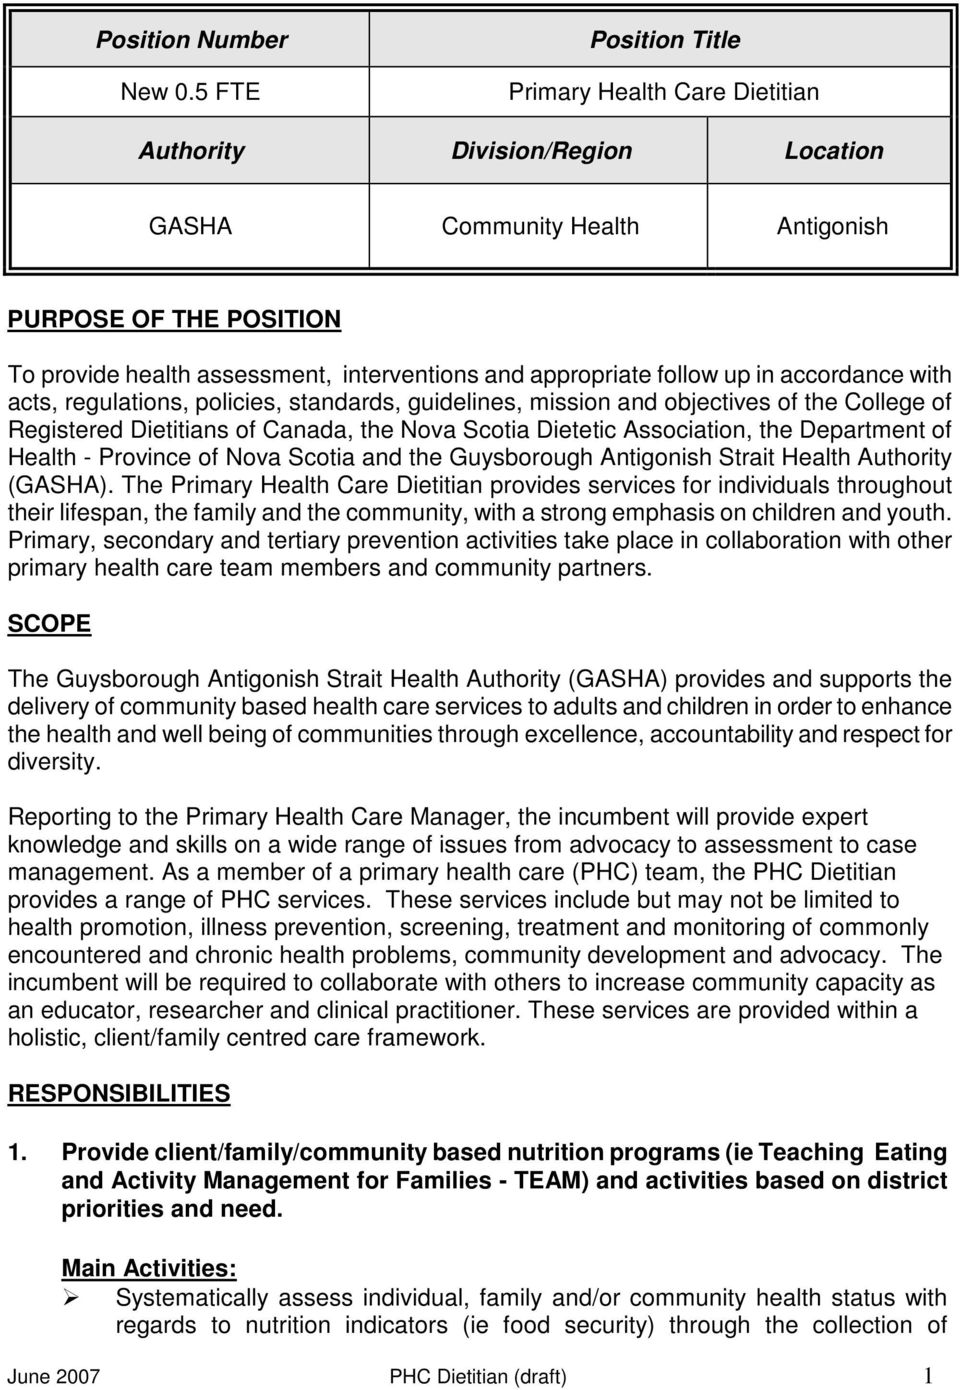 appropriate follow up in accordance with acts, regulations, policies, standards, guidelines, mission and objectives of the College of Registered Dietitians of Canada, the Nova Scotia Dietetic